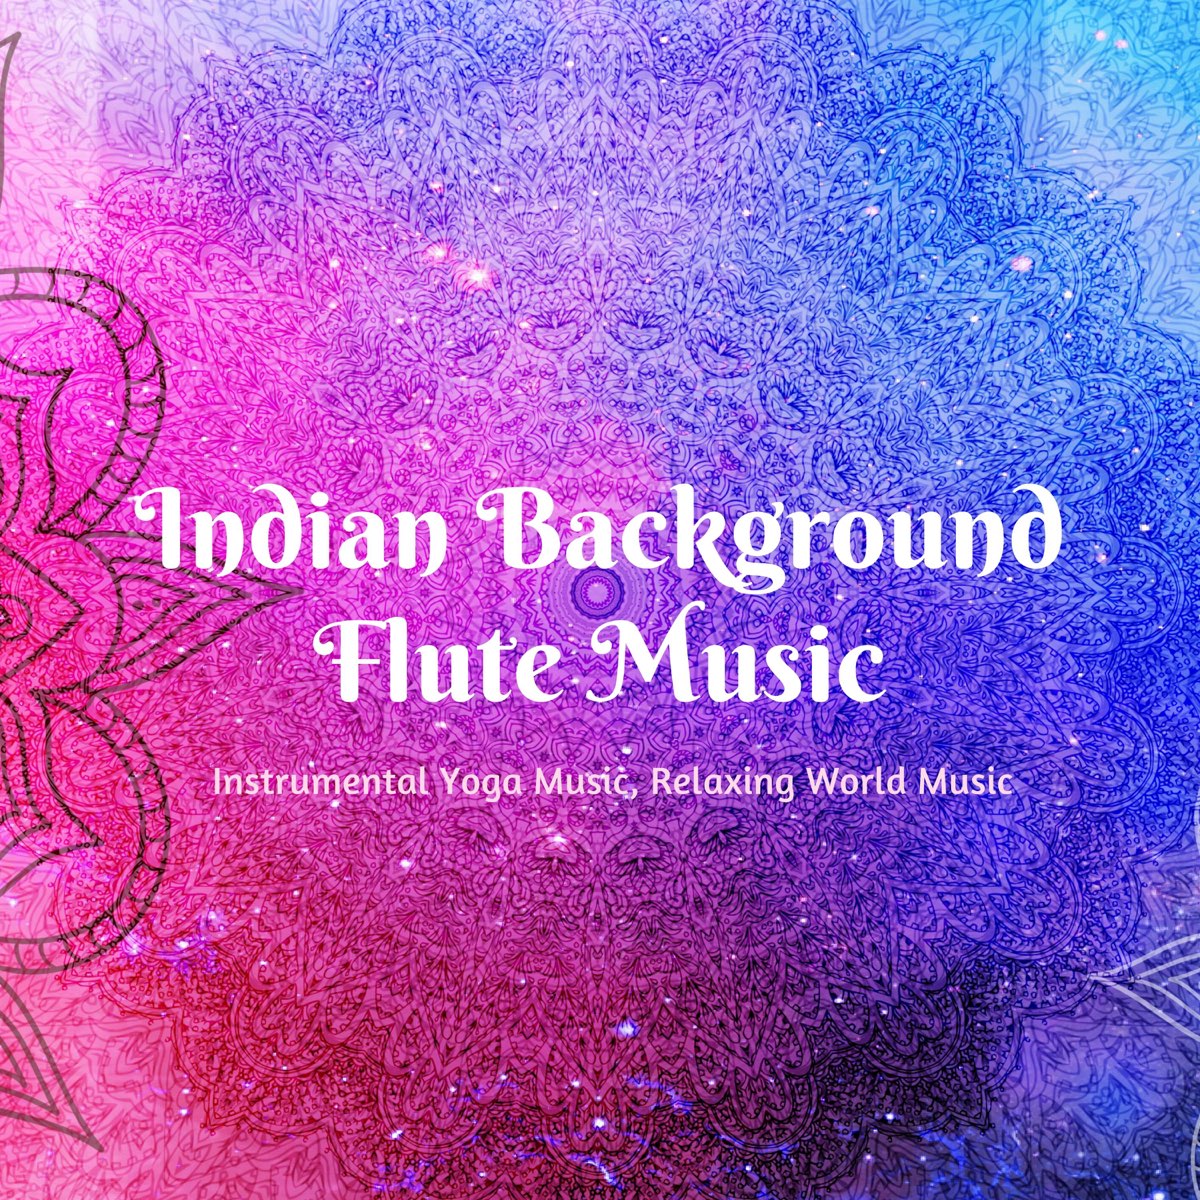 Indian Background Flute Music - Instrumental Yoga Music, Relaxing World  Music by Nehal Ravi on Apple Music